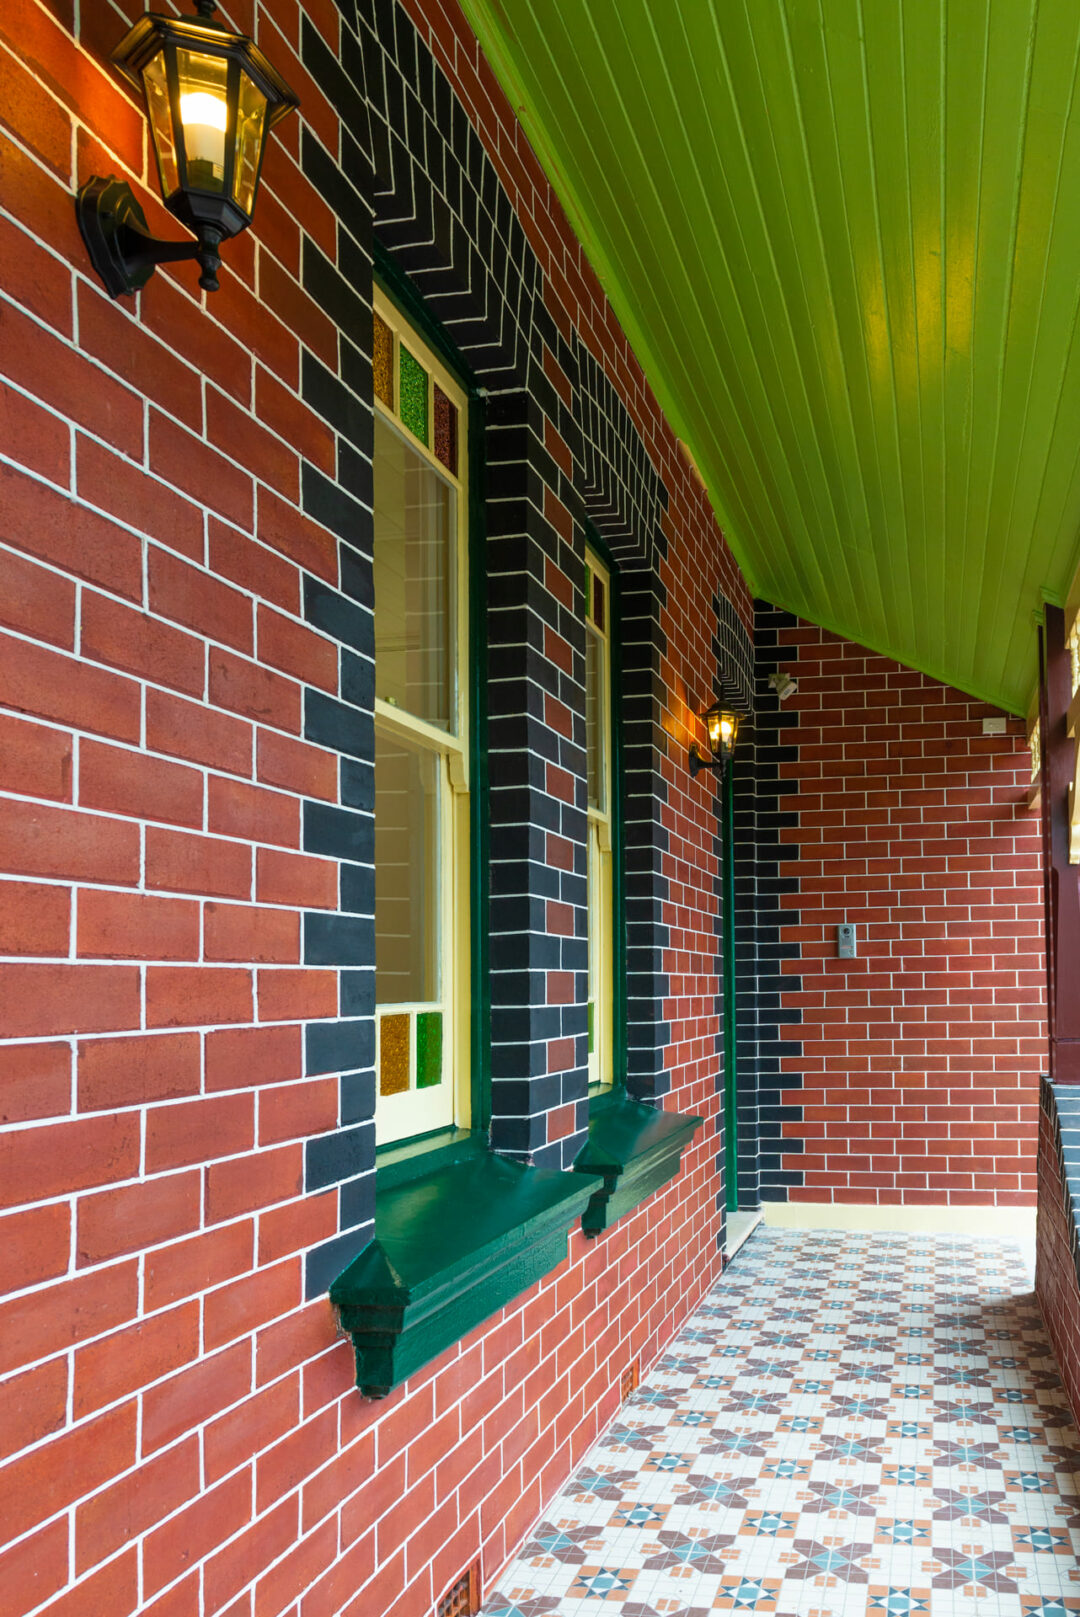 Red bricks wall with green roof